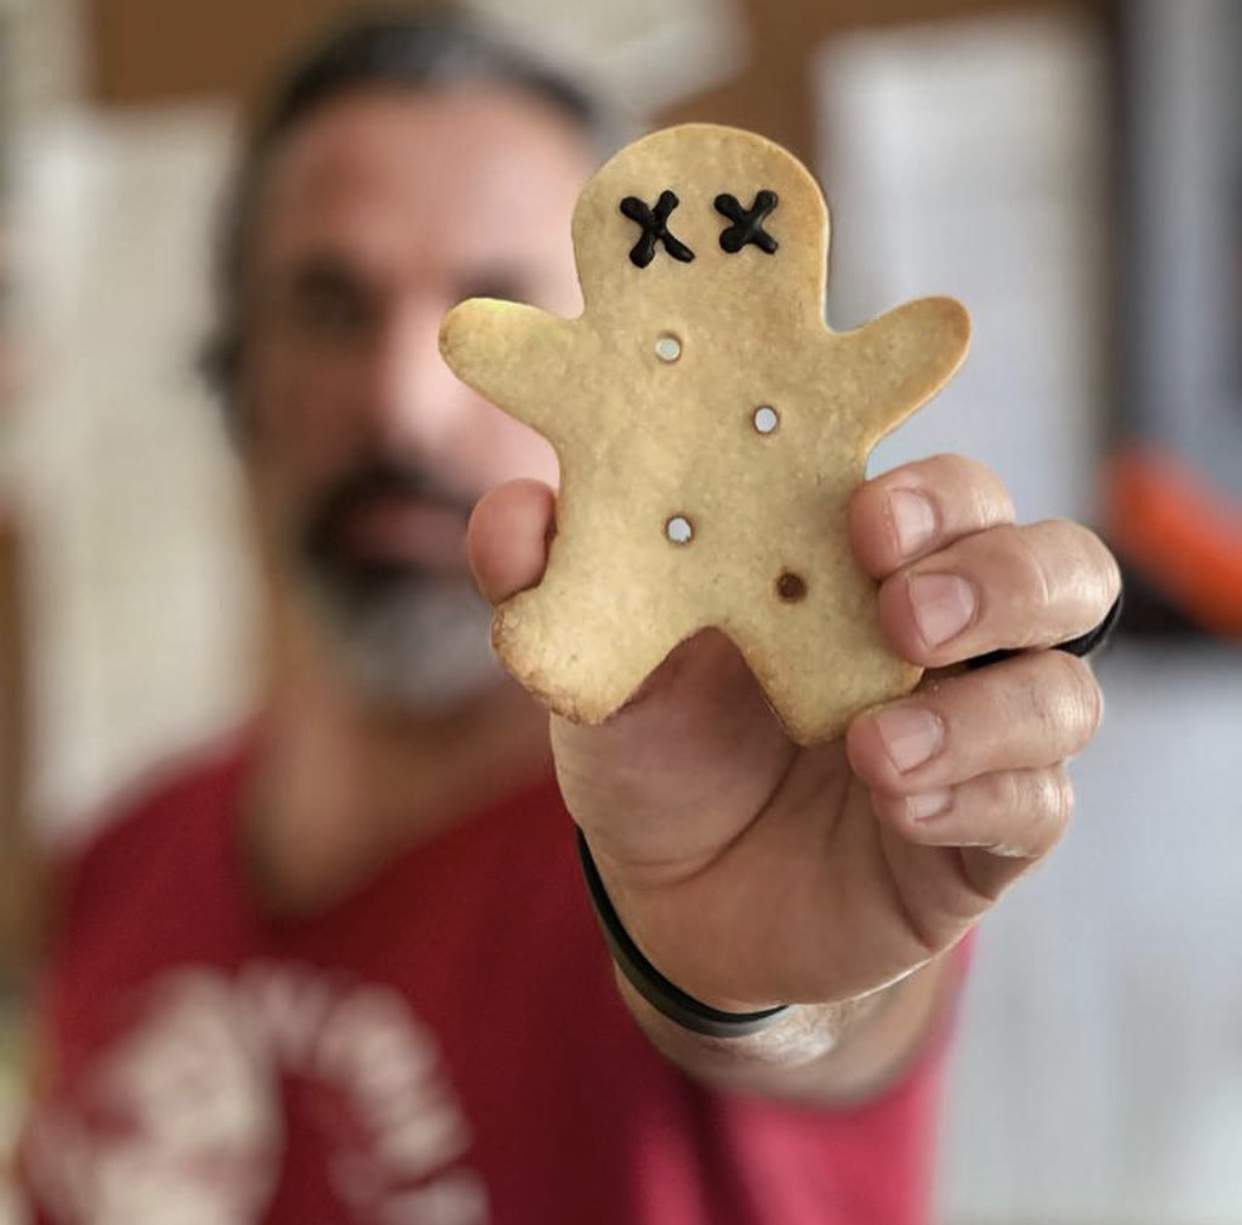 Parents of Parkland victim bake bullet-hole cookies for the NRA